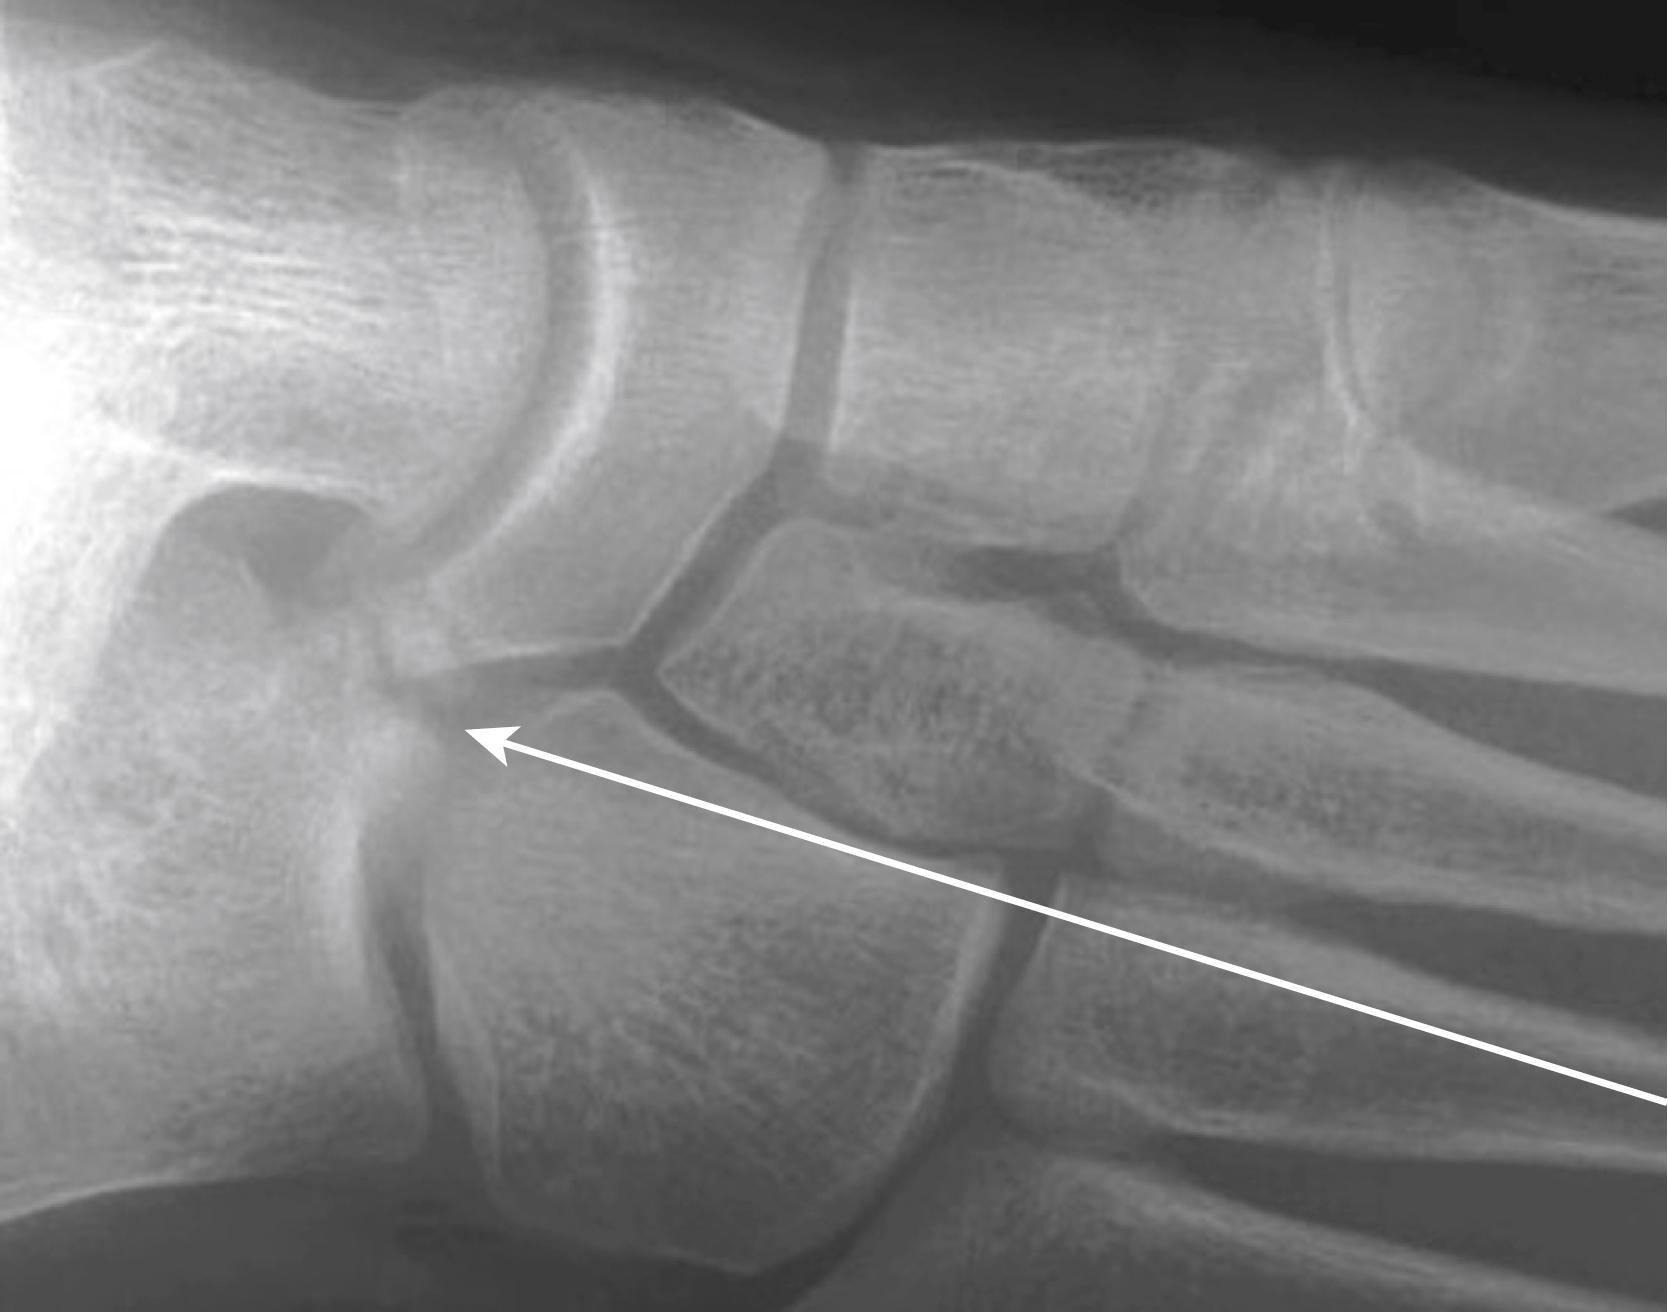 Fig. 11.9, X-Ray Showing Tarsal Coalition.